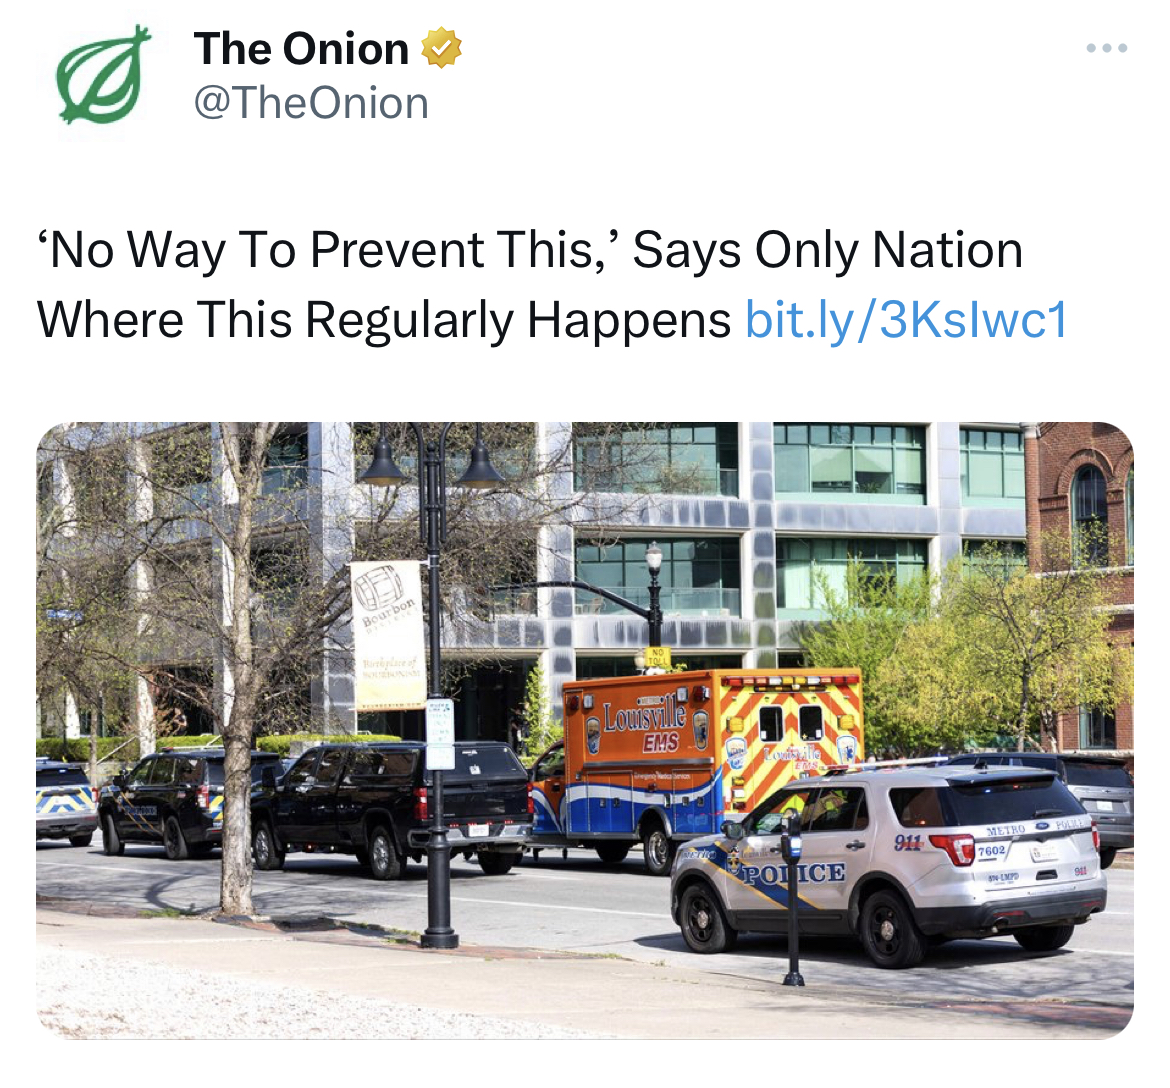 savage tweets - urban design - The Onion 'No Way To Prevent This,' Says Only Nation Where This Regularly Happens bit.ly3Kslwc1 Lousule Ems Police 911 puse